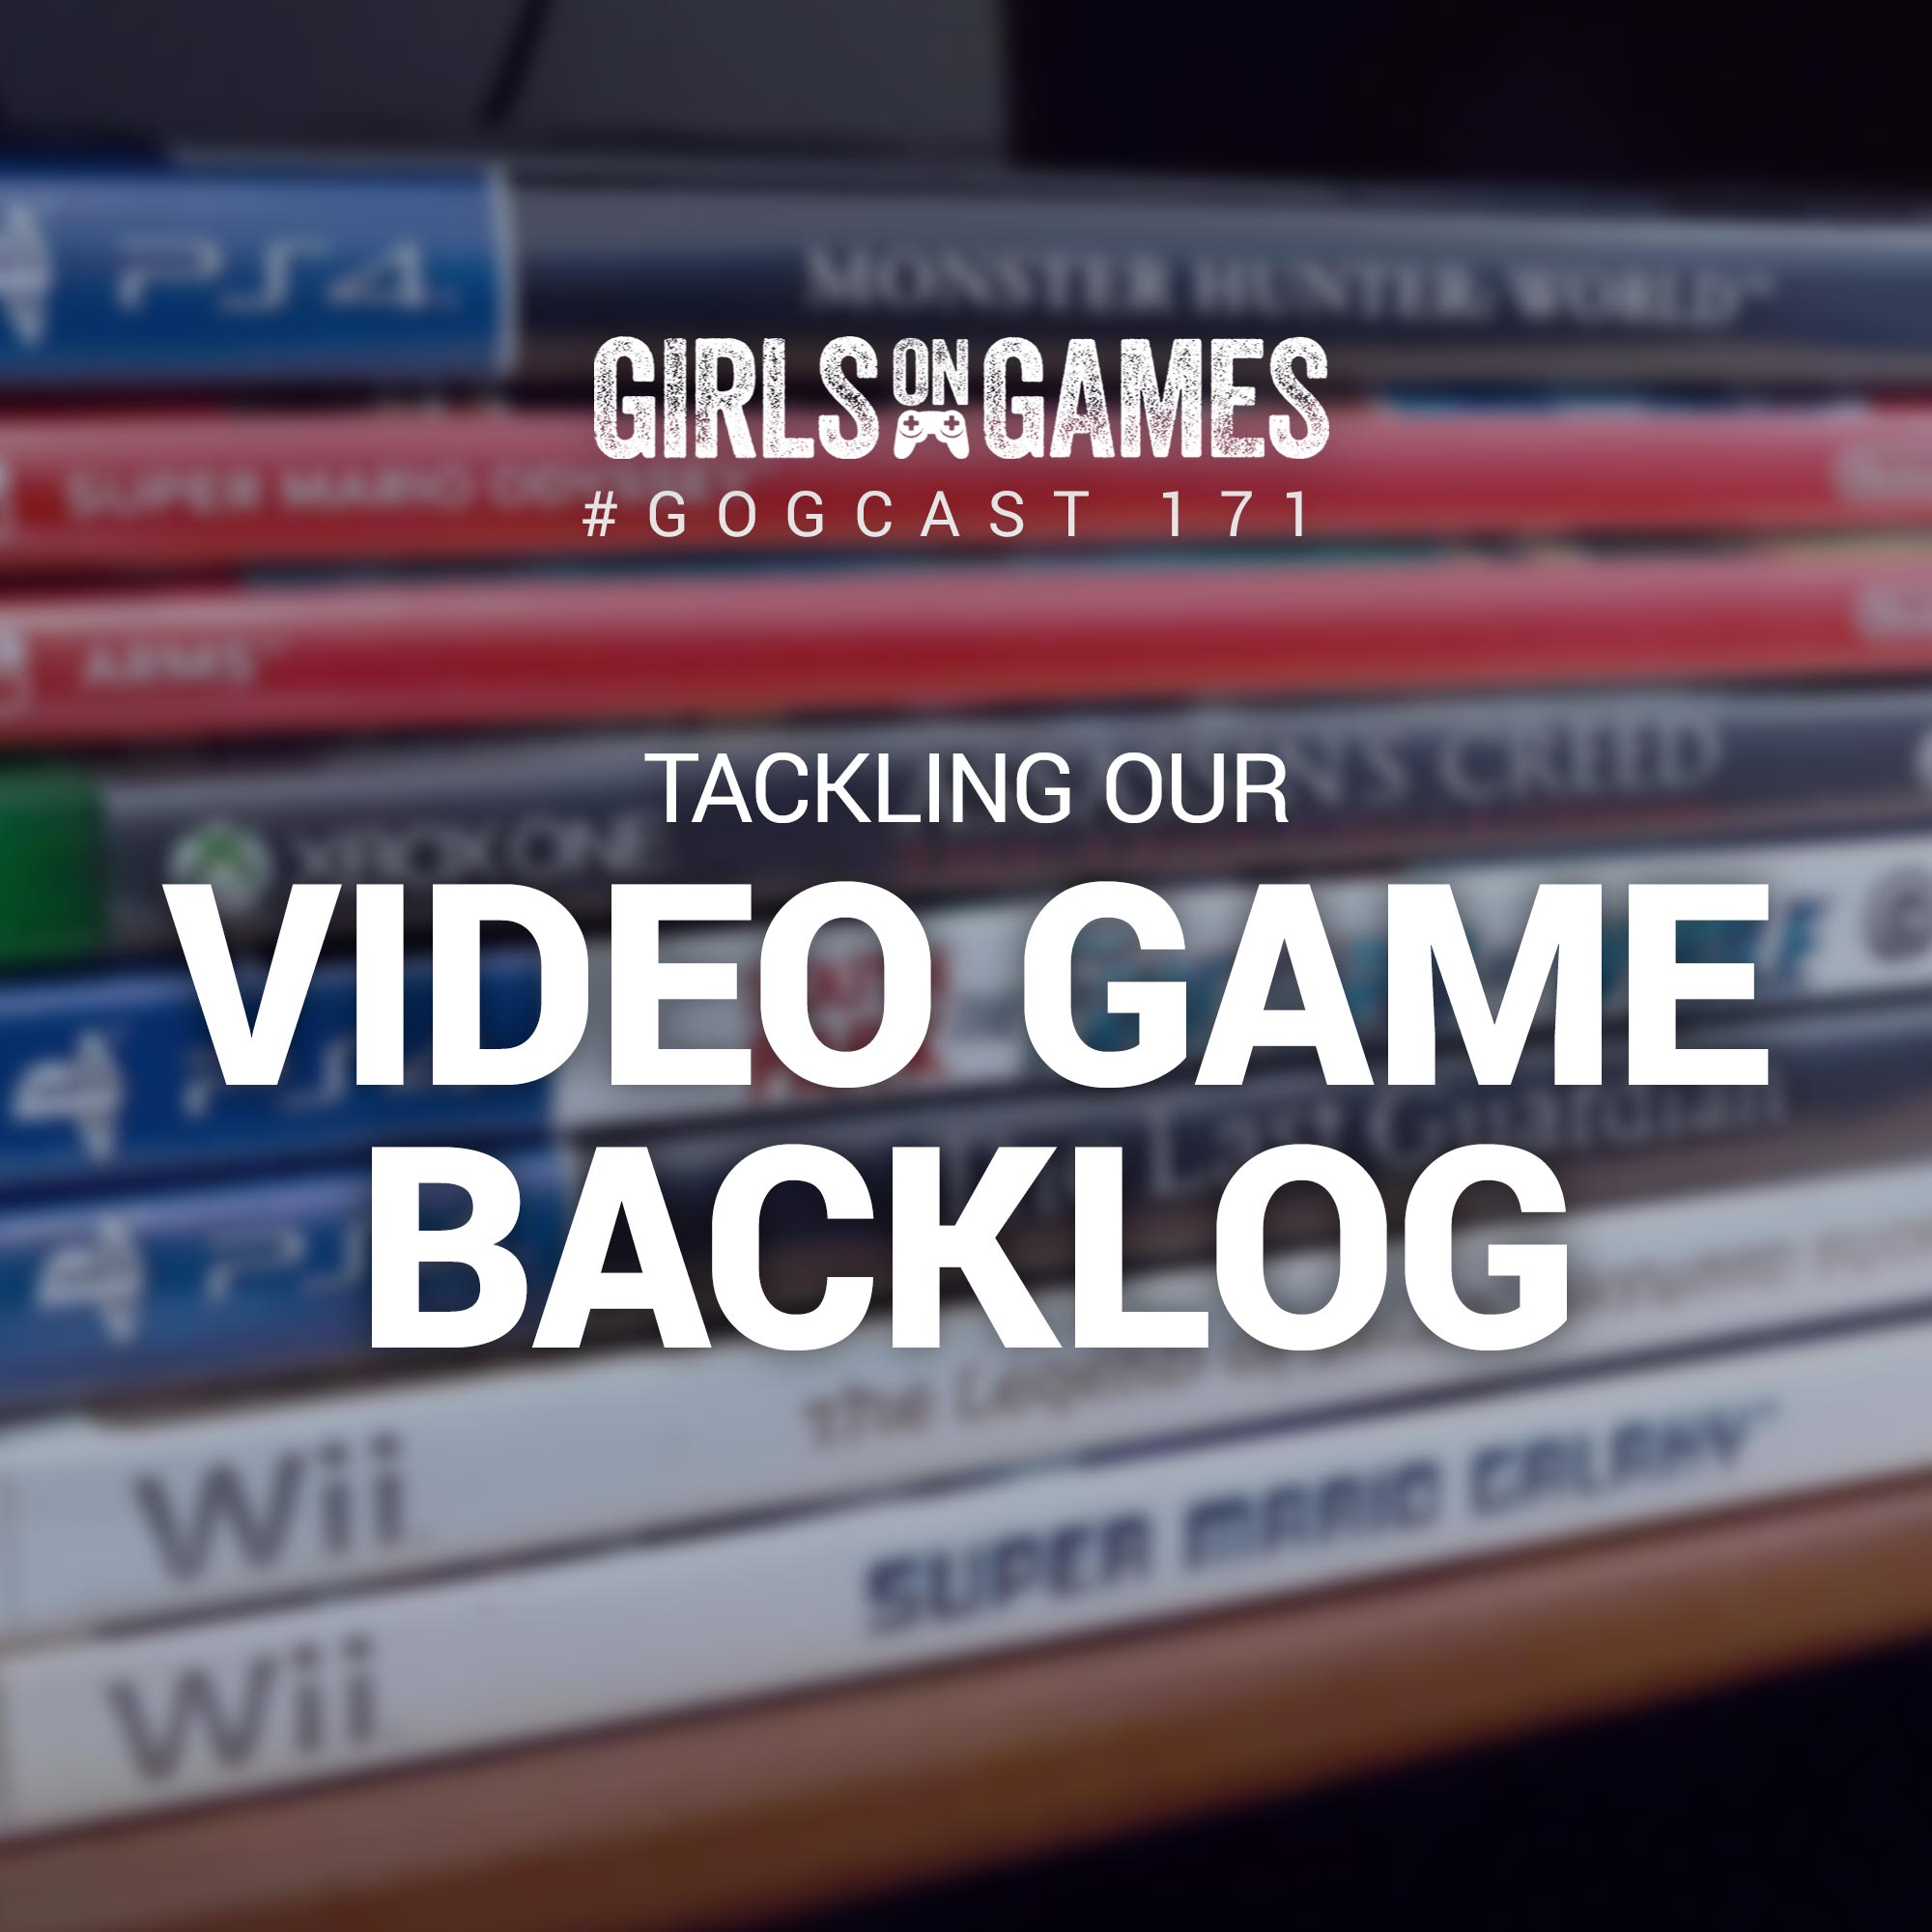 GoGCast 171: Tackling our Video Game Backlog